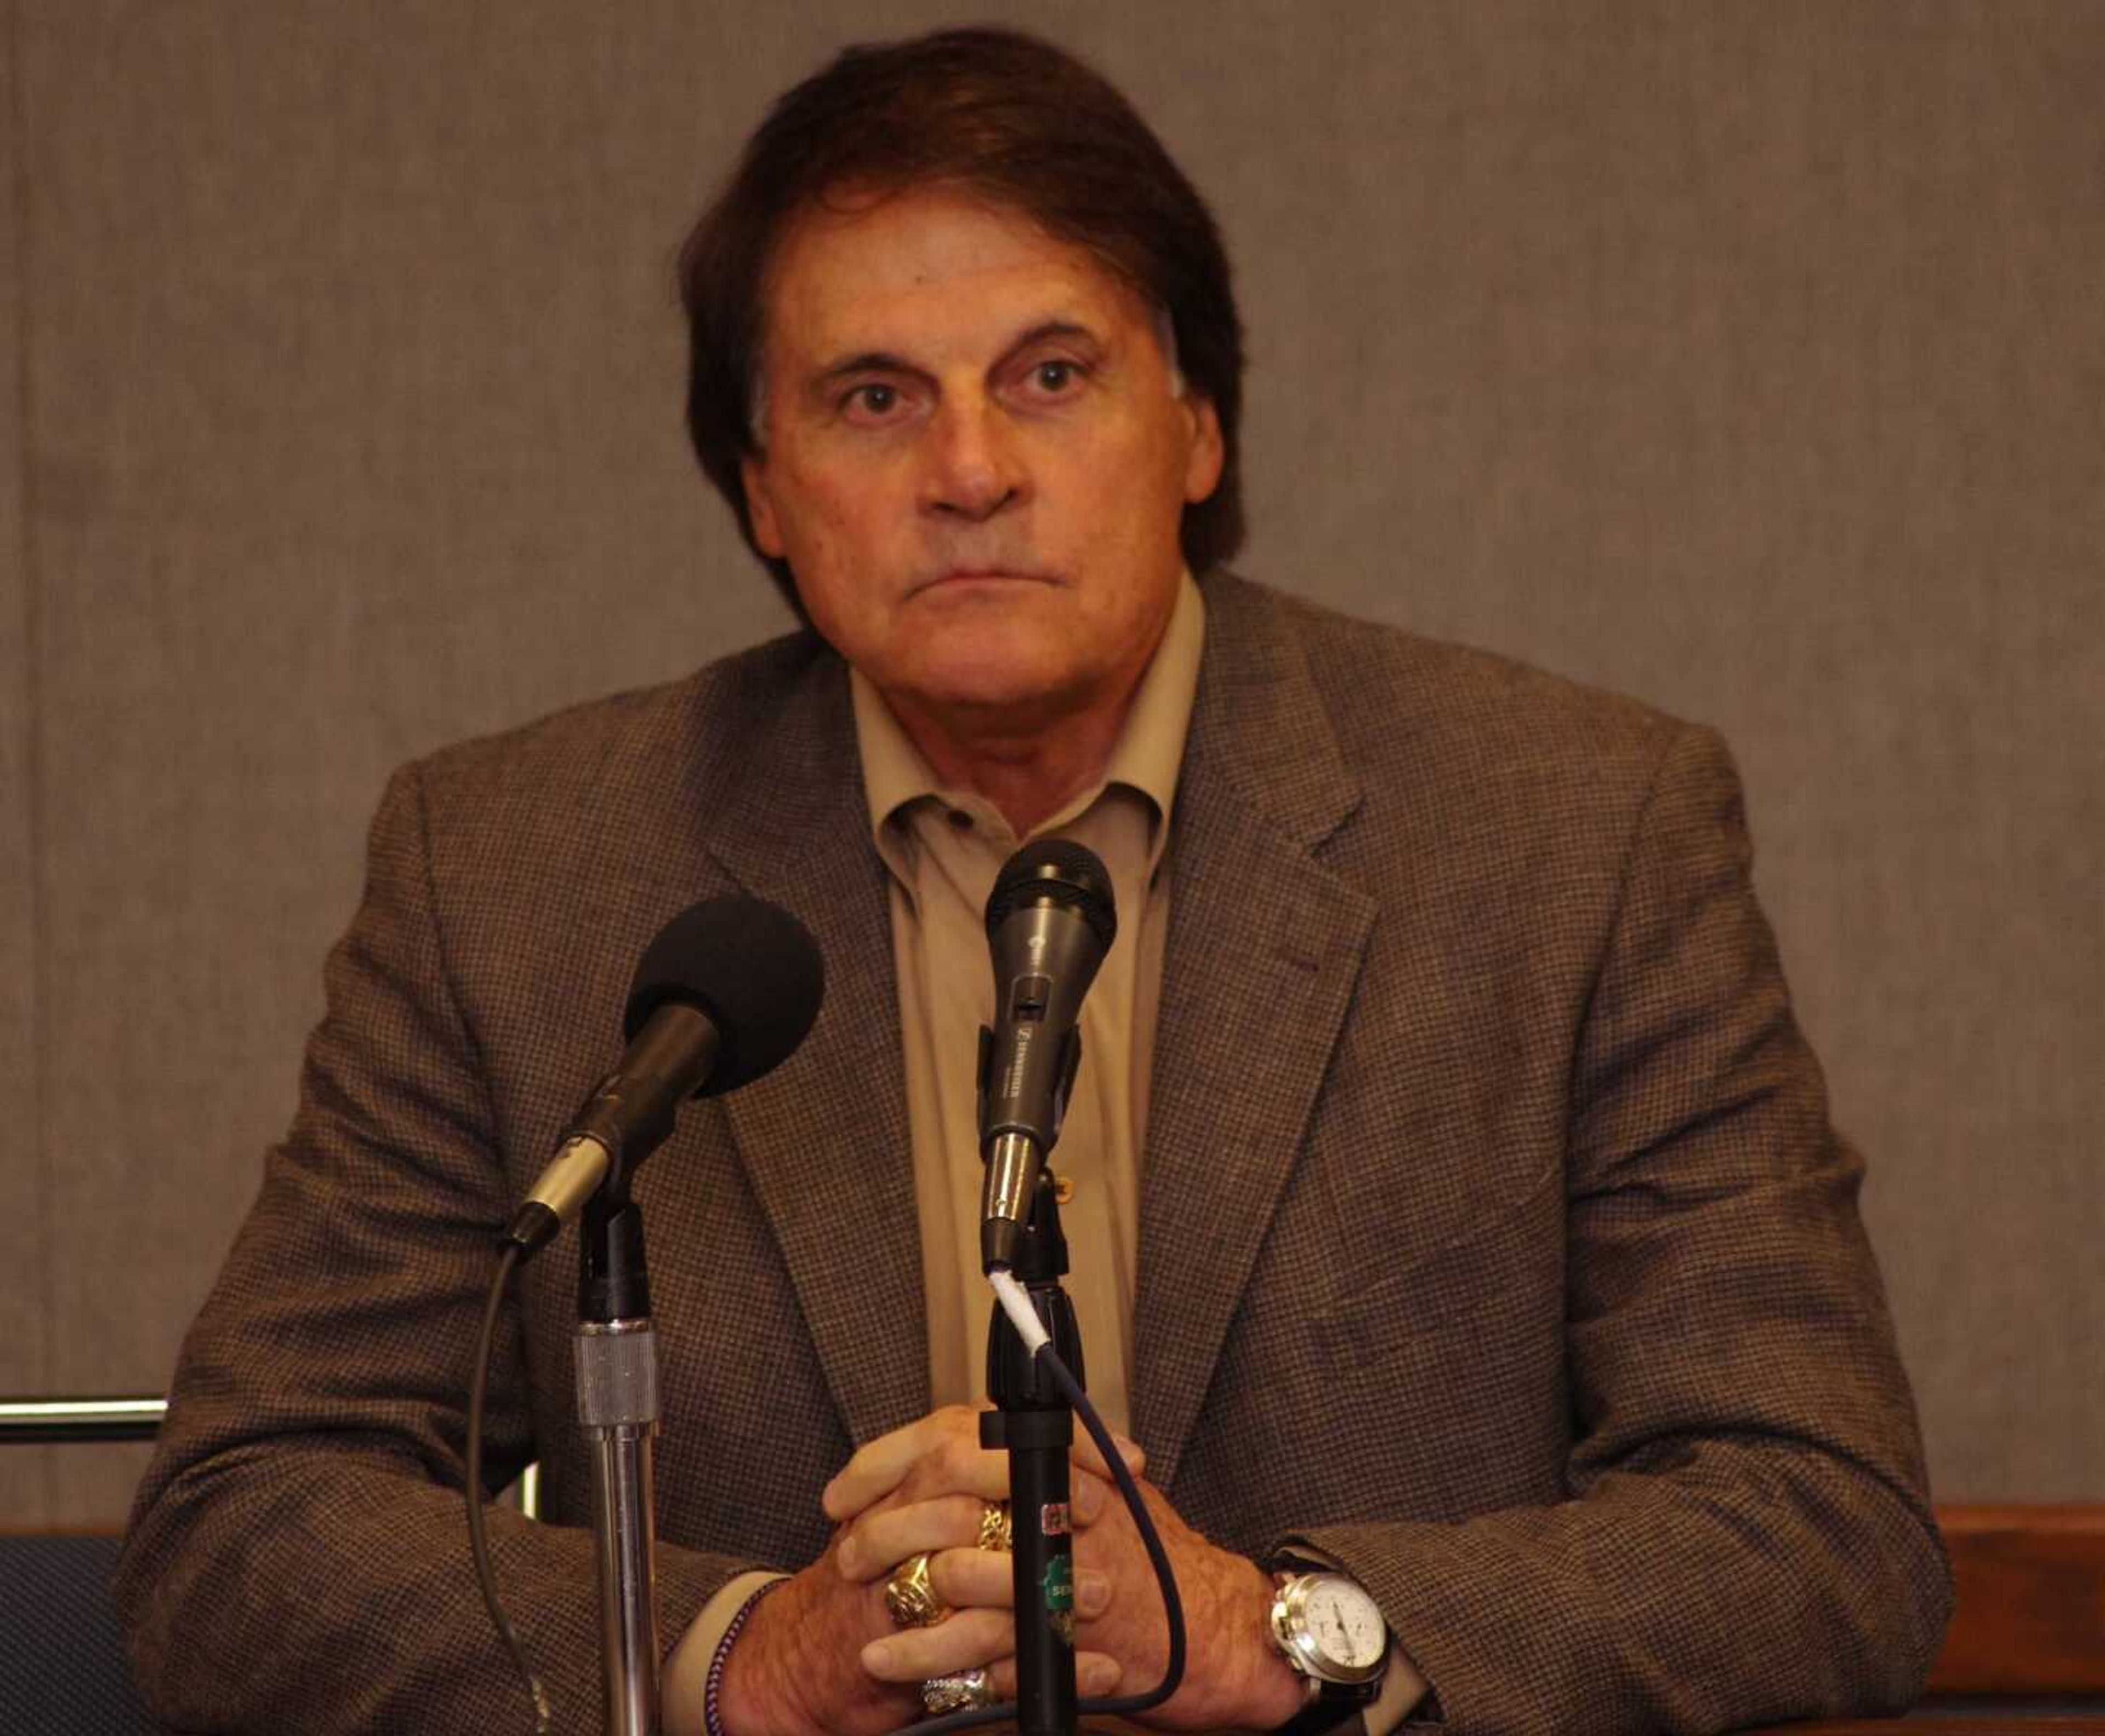 Tony La Russa reflects on his year after retirement